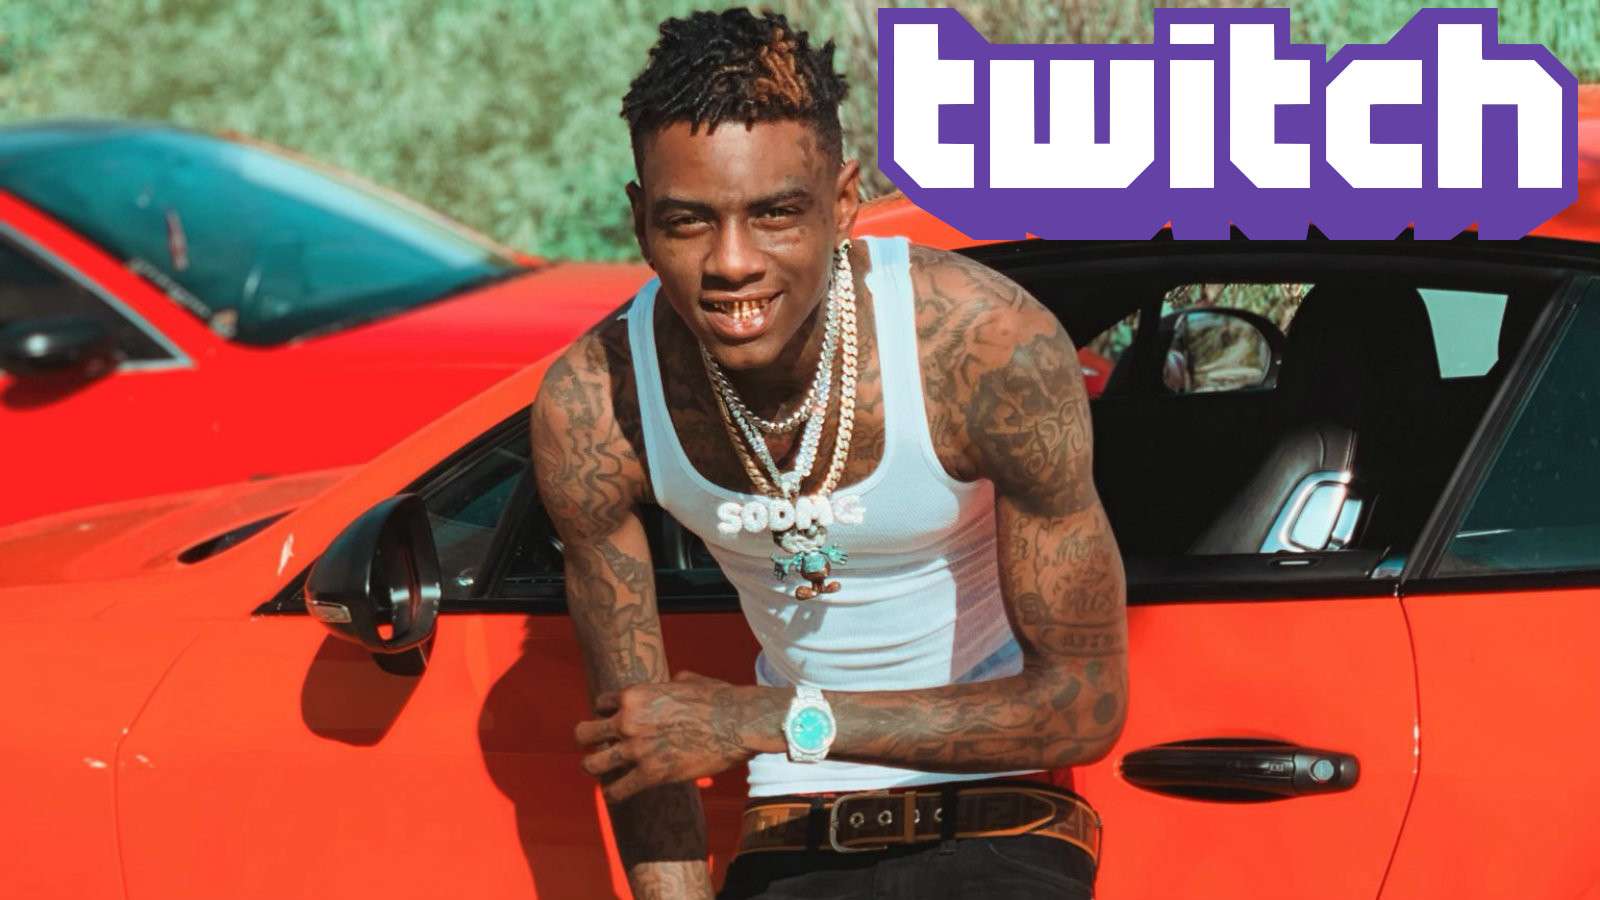 Soulja Boy poses with a car and the Twitch logo